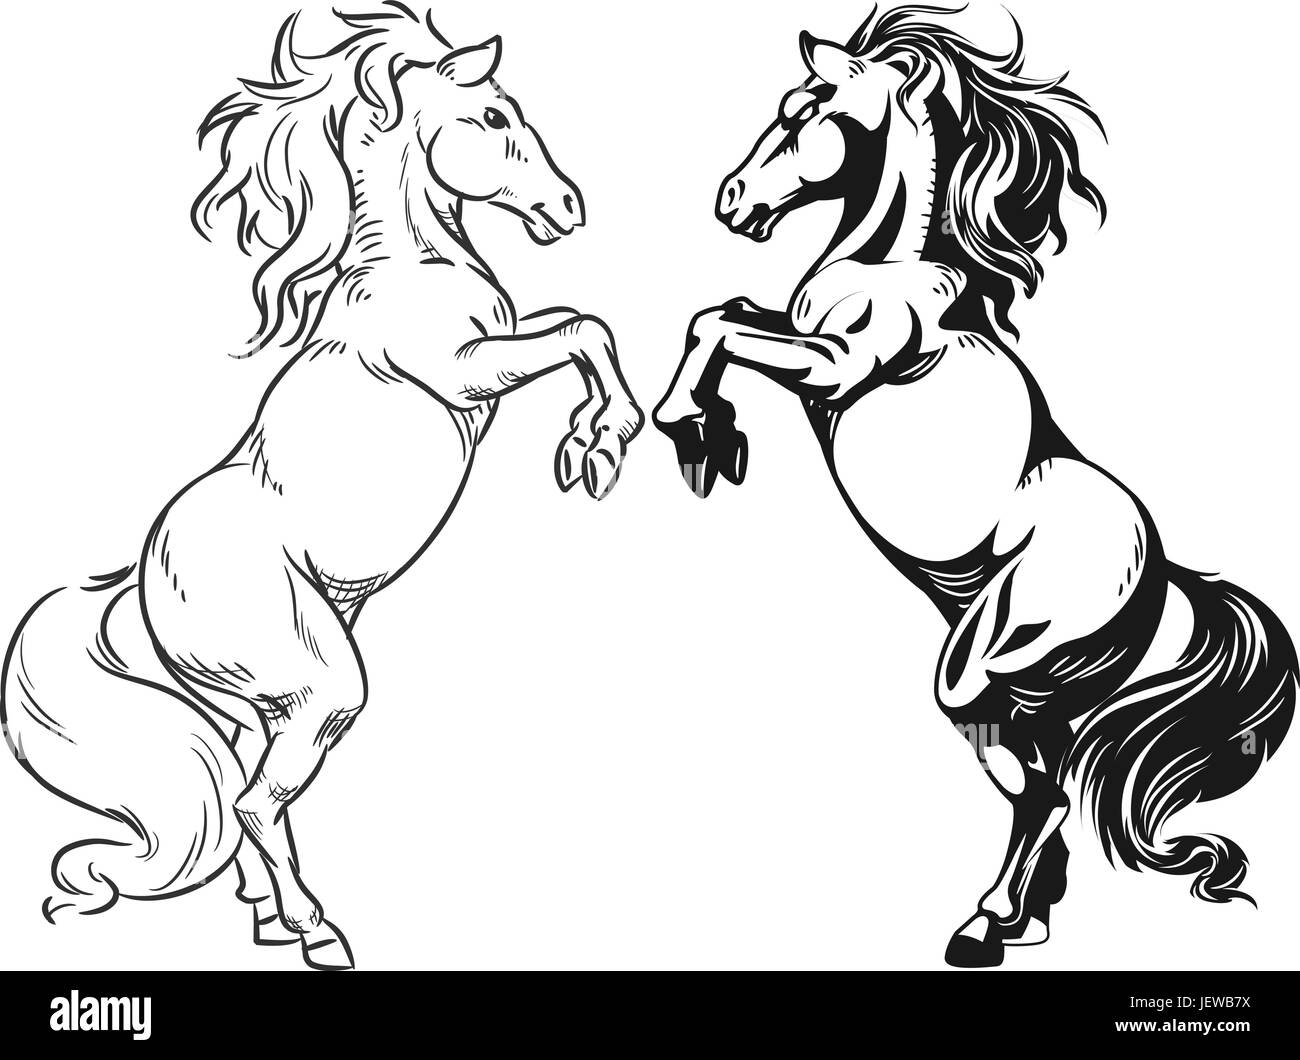 horse, animal, illustration, stallion, sketch, photo, picture, image, copy, Stock Vector